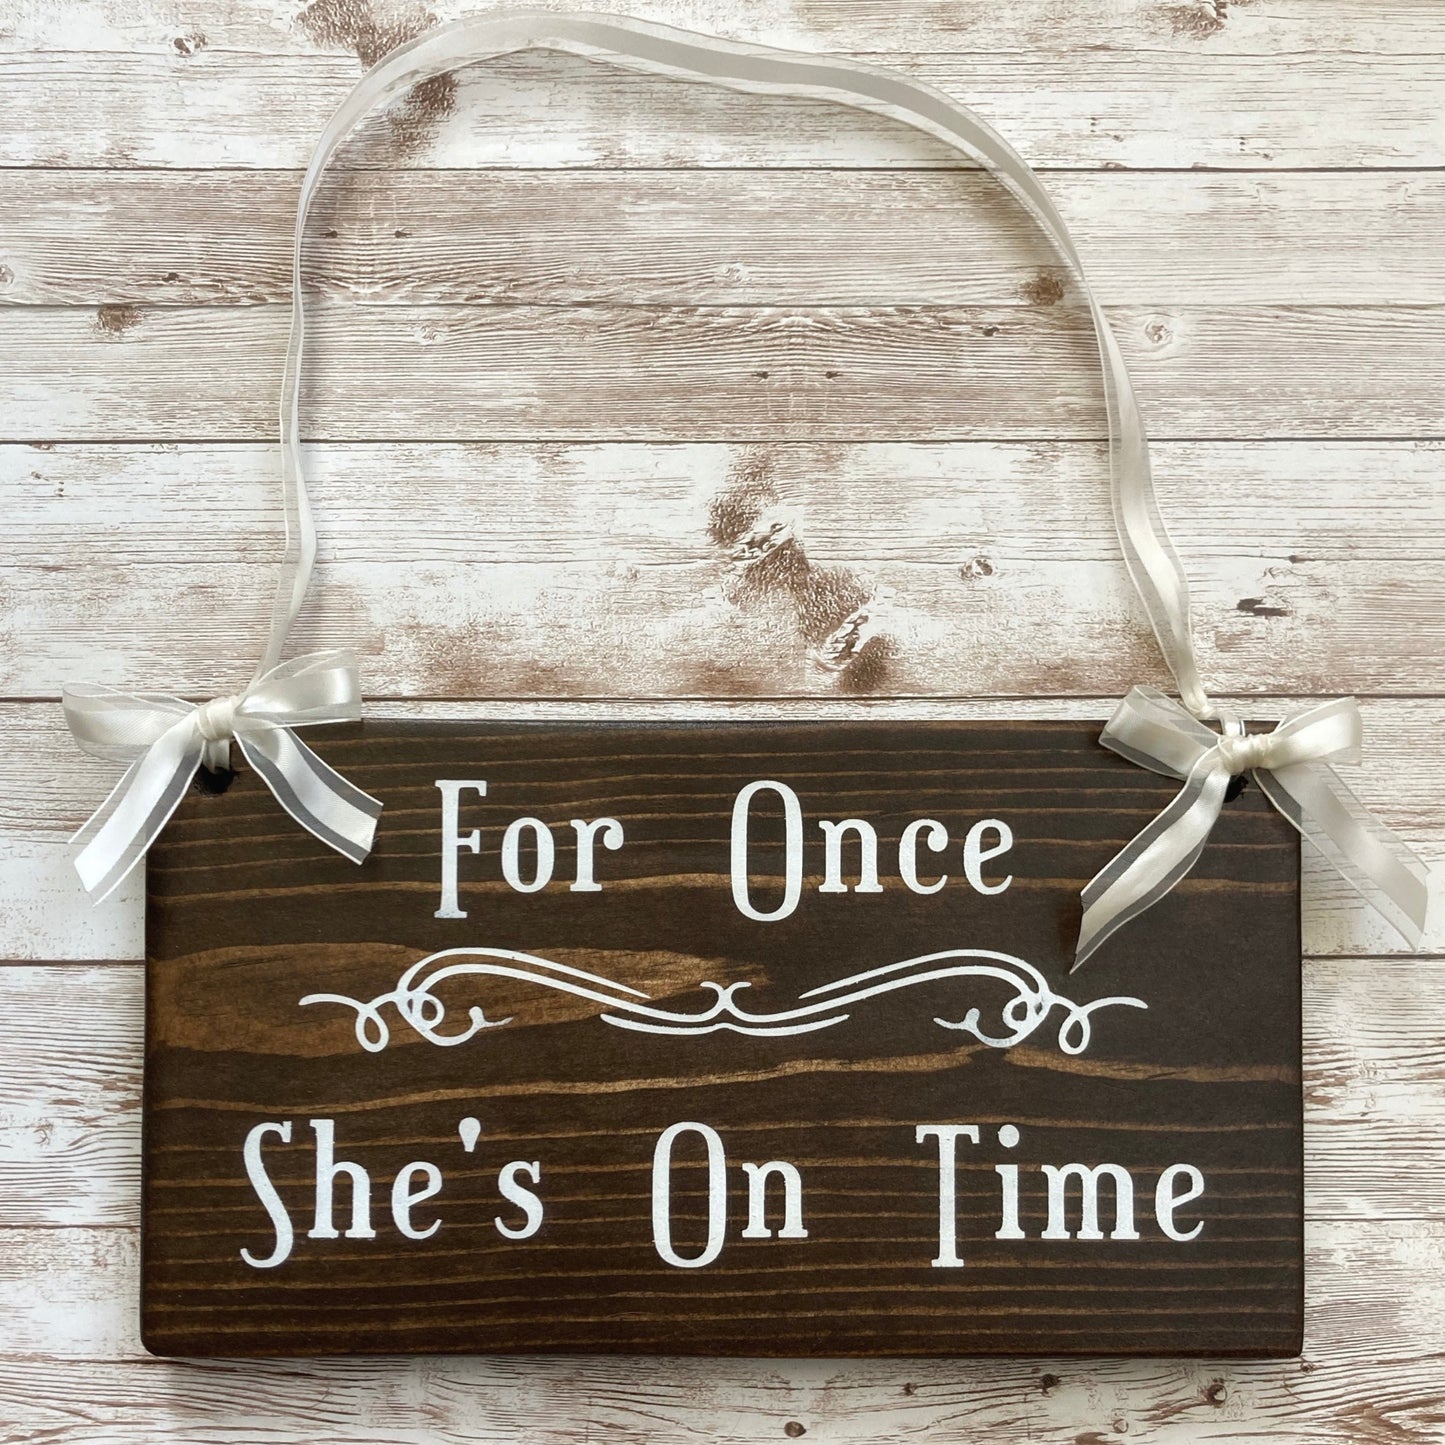 Funny Small Ring Bearer Signs for Your Wedding